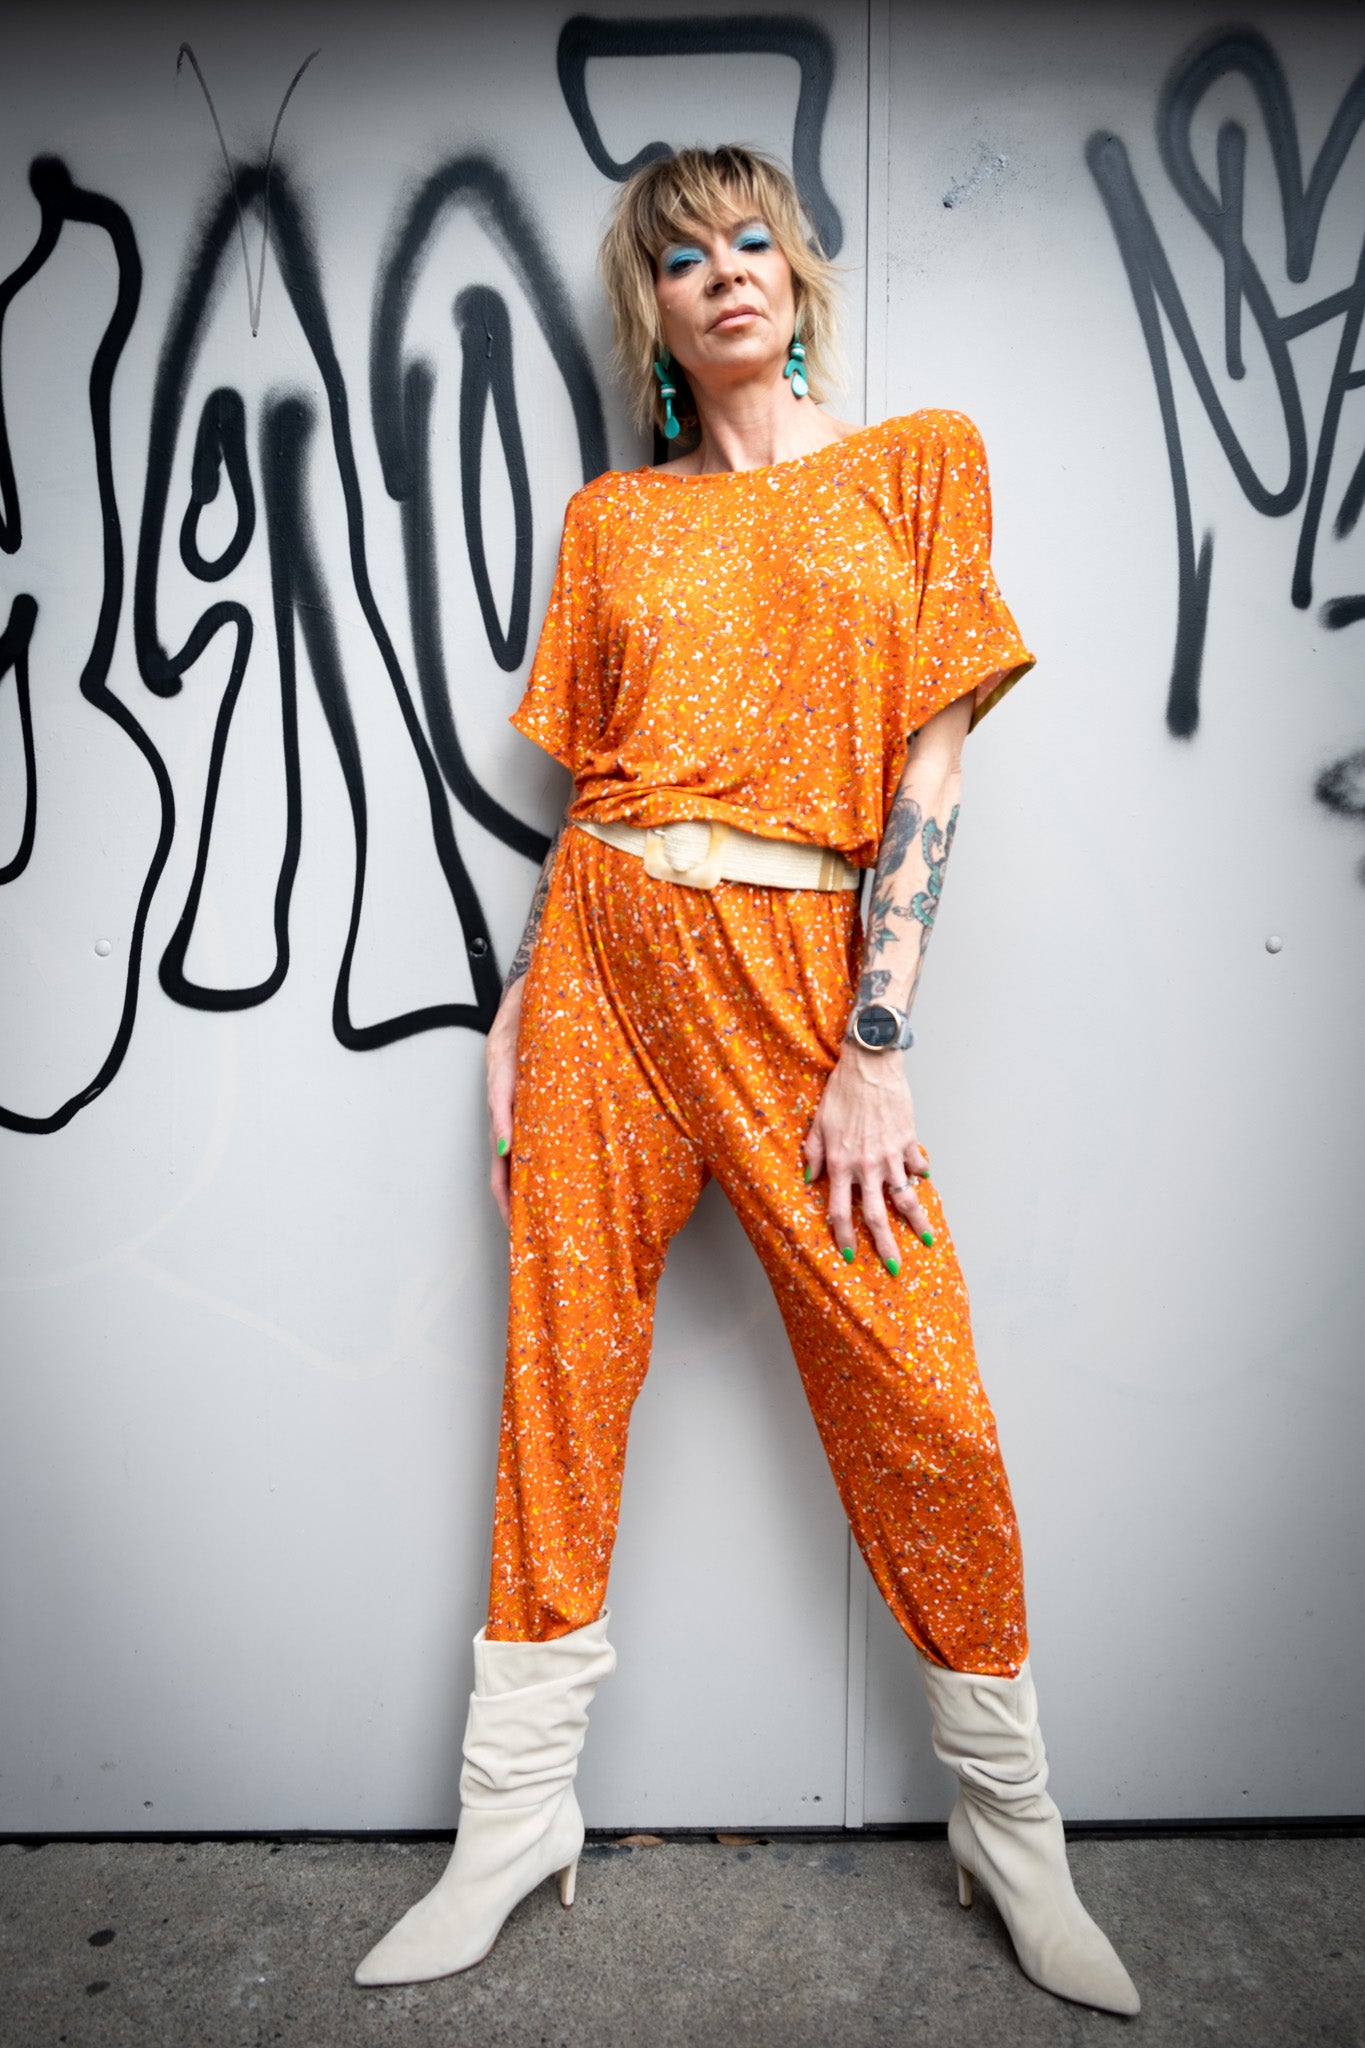 A model posing against a white wall wearing a bright orange jumpsuit, white belt, and ankle boots.